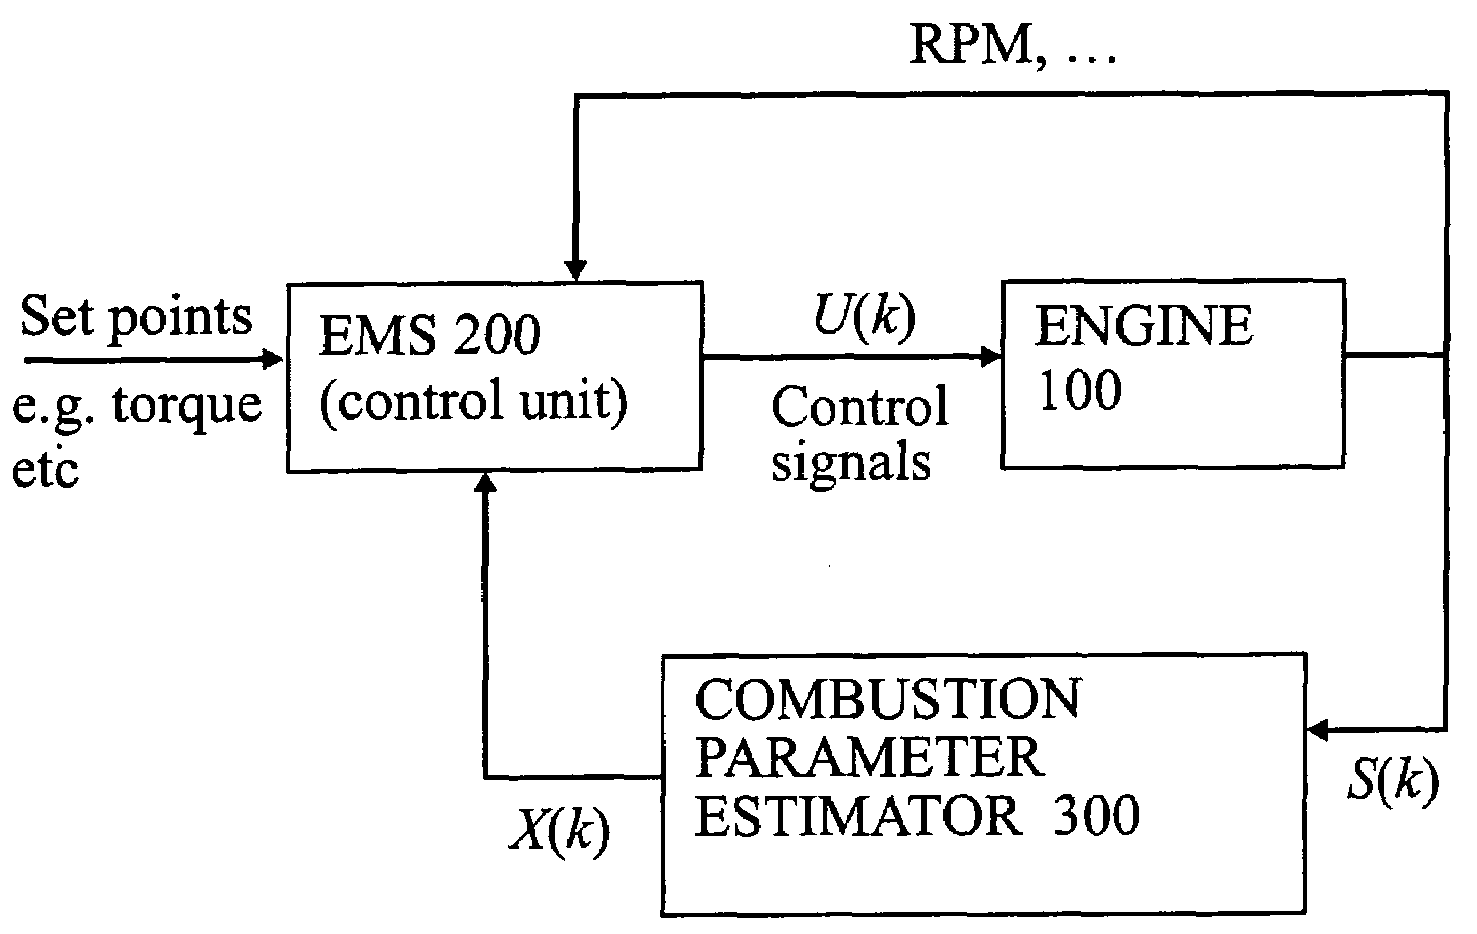 Method for the estimation of combustion parameters